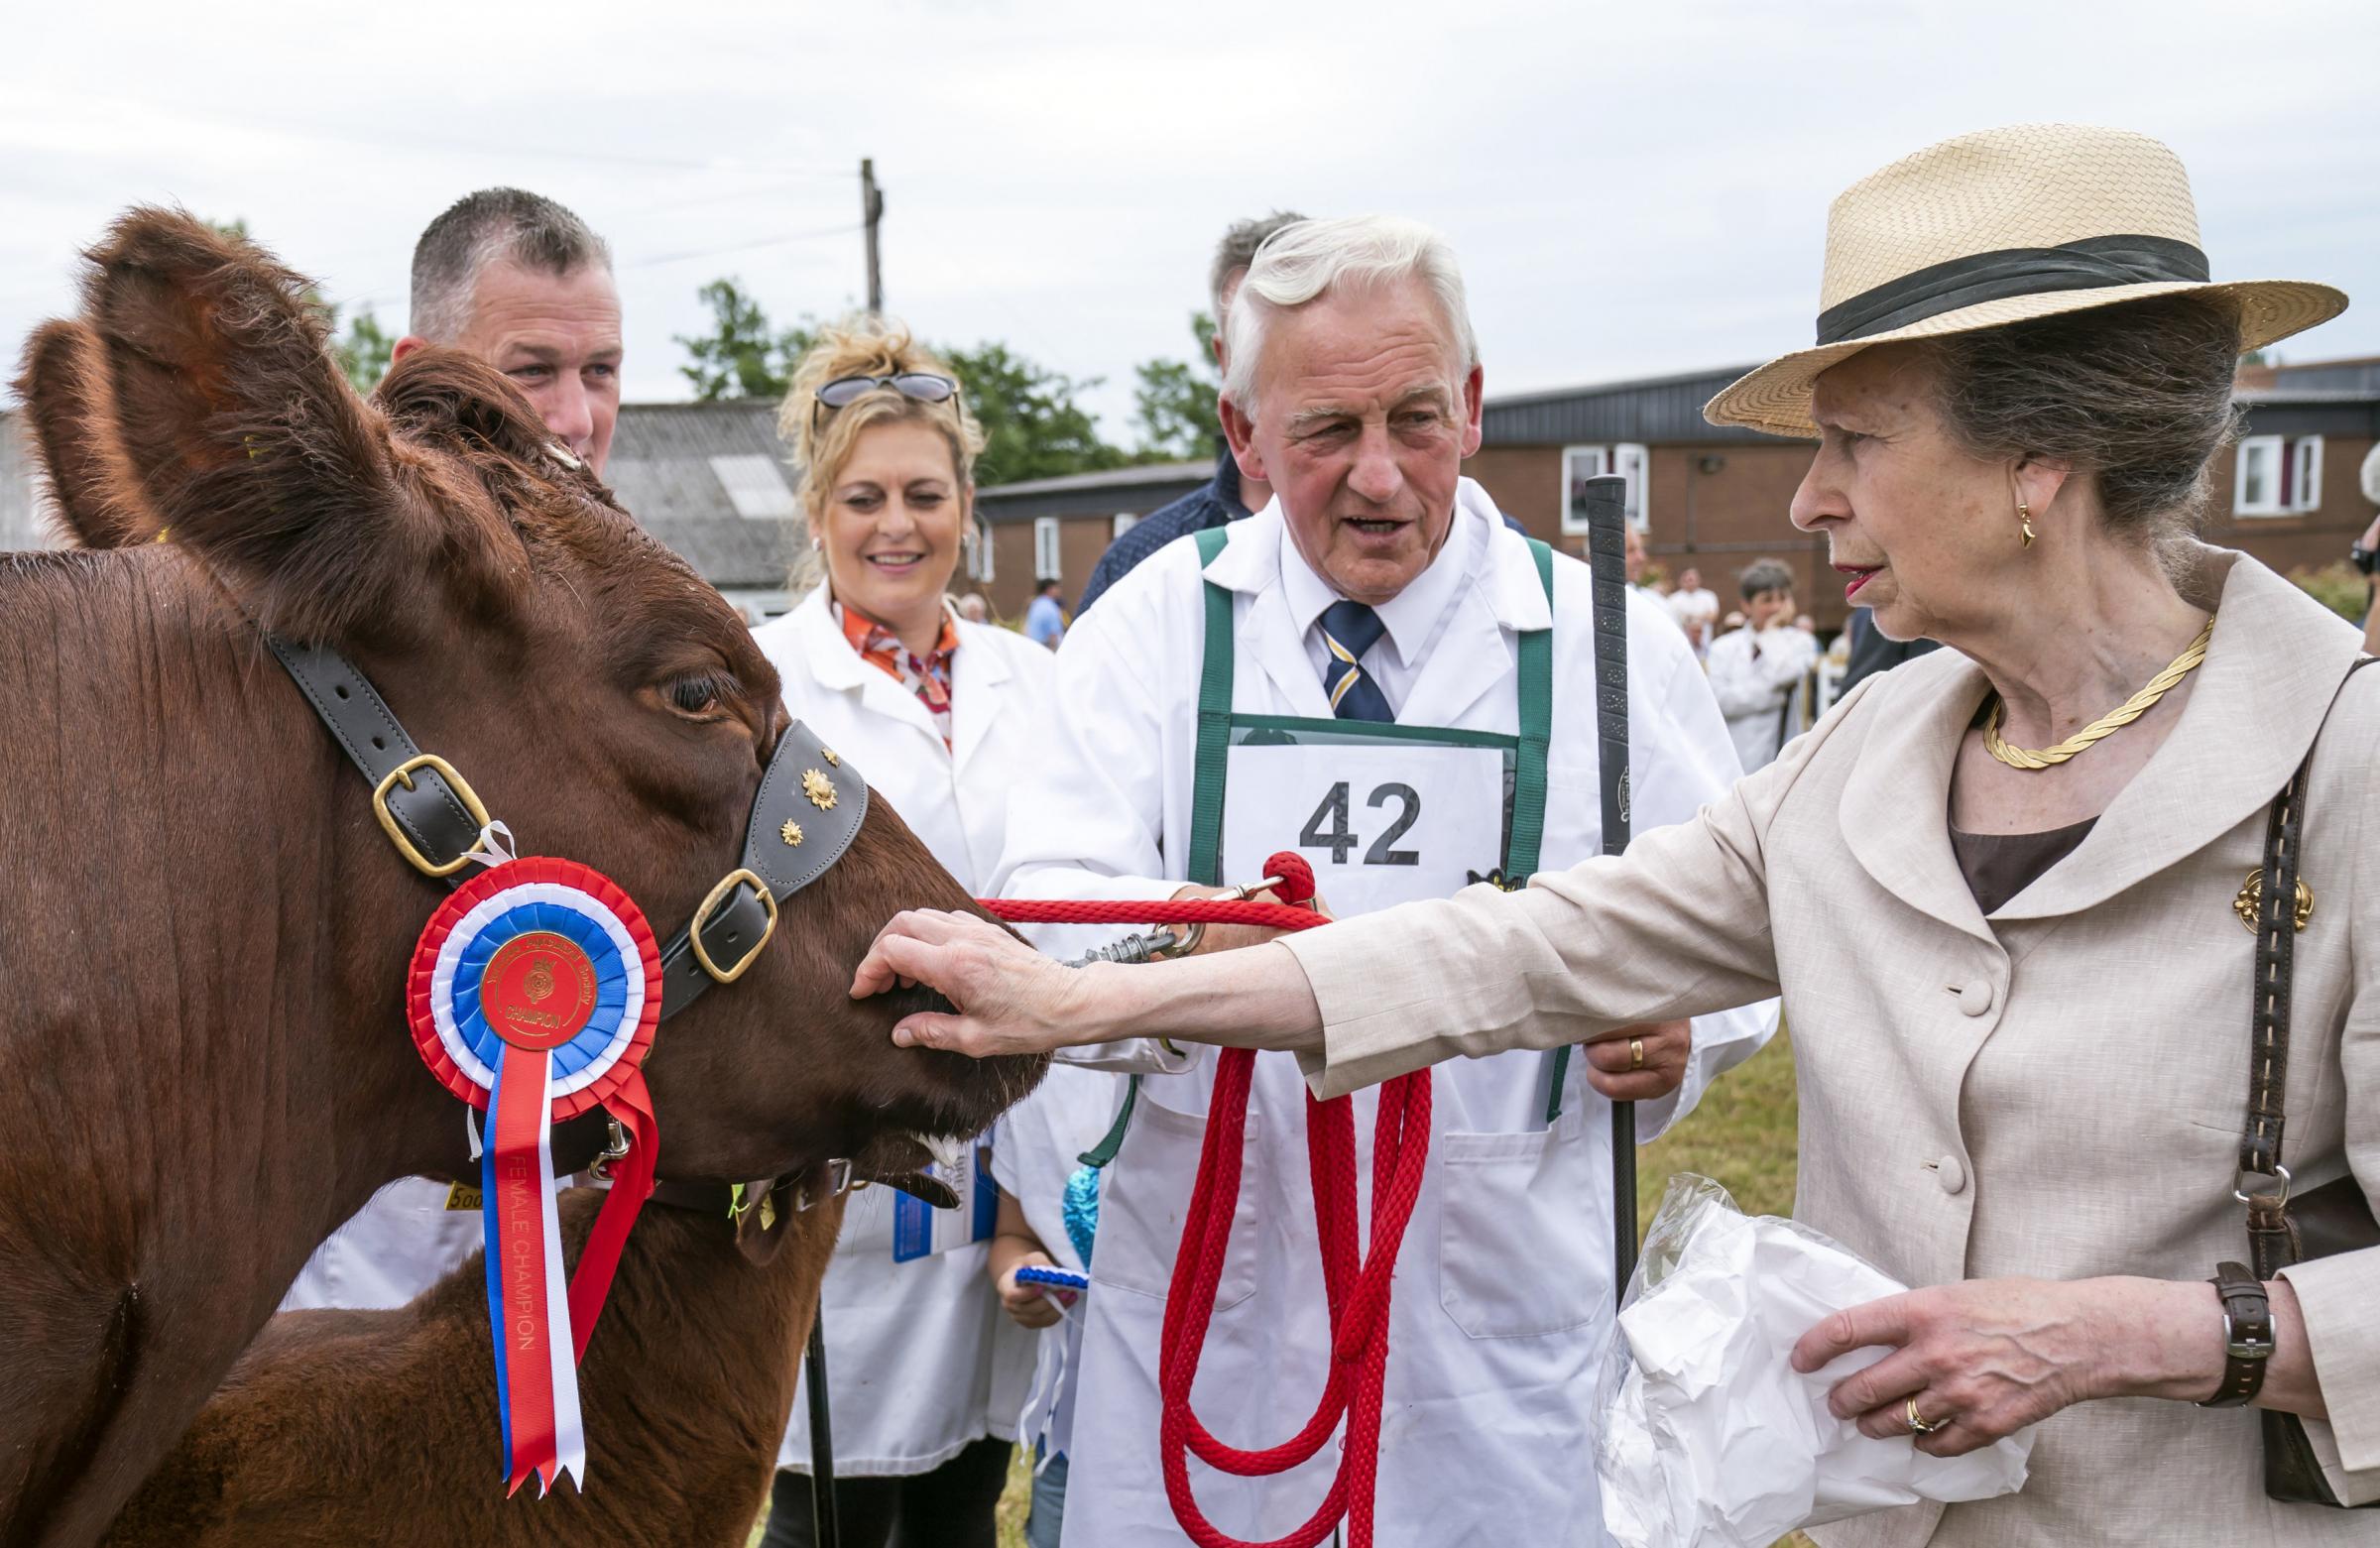 The Princess Royal during a visit to the Great Yorkshire Show at the Great Yorkshire Showground in Harrogate